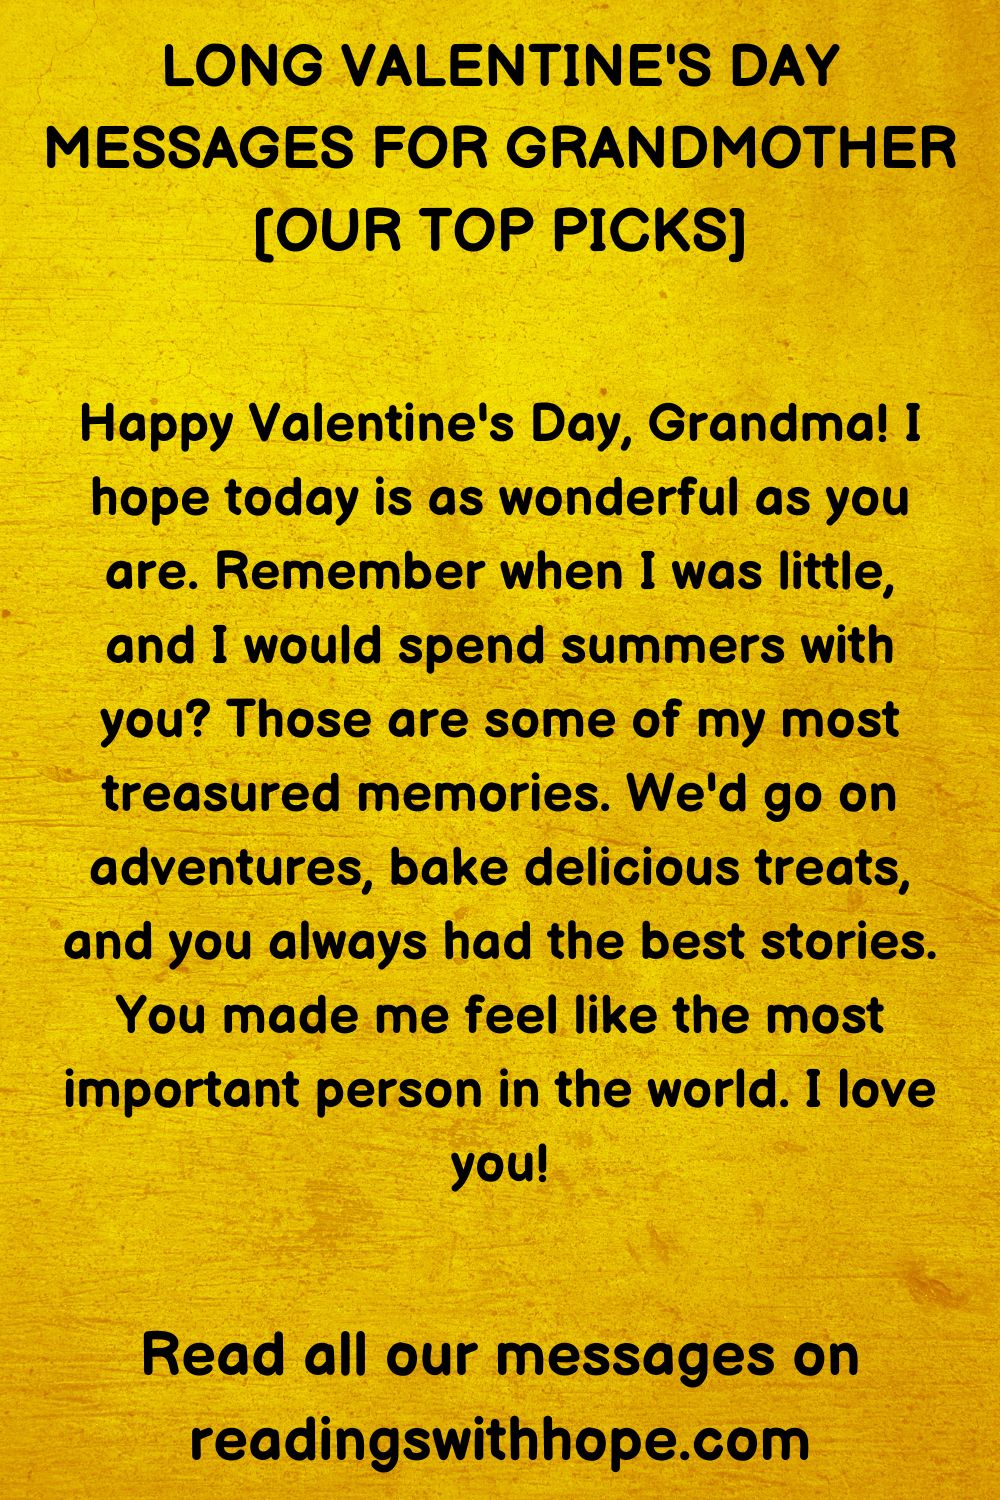 Long Valentine's Day Messages for Grandmother